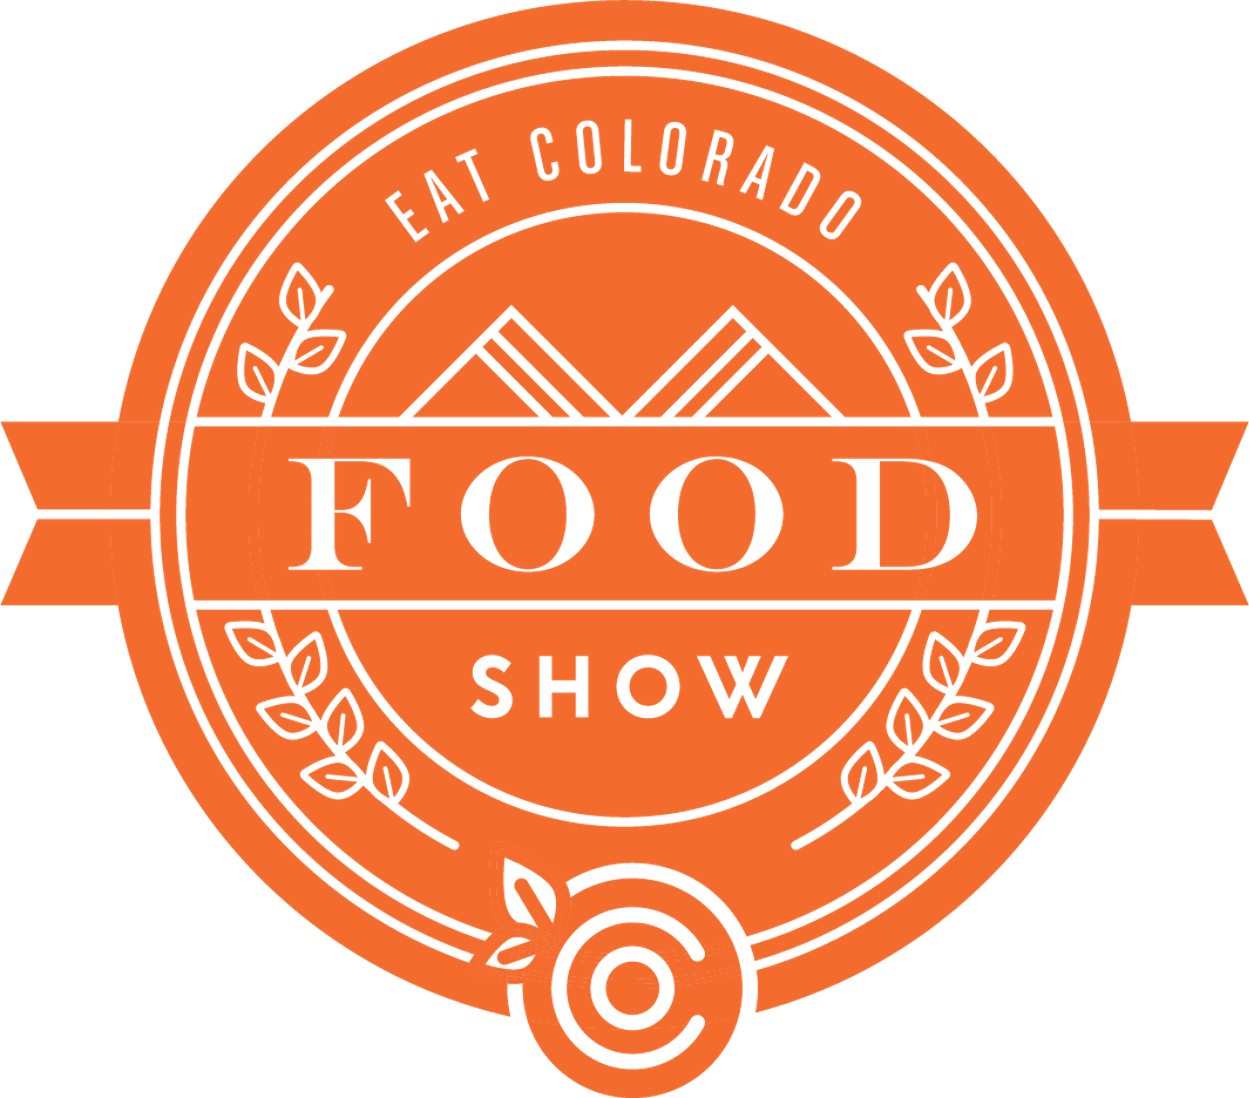 Food show. Show co